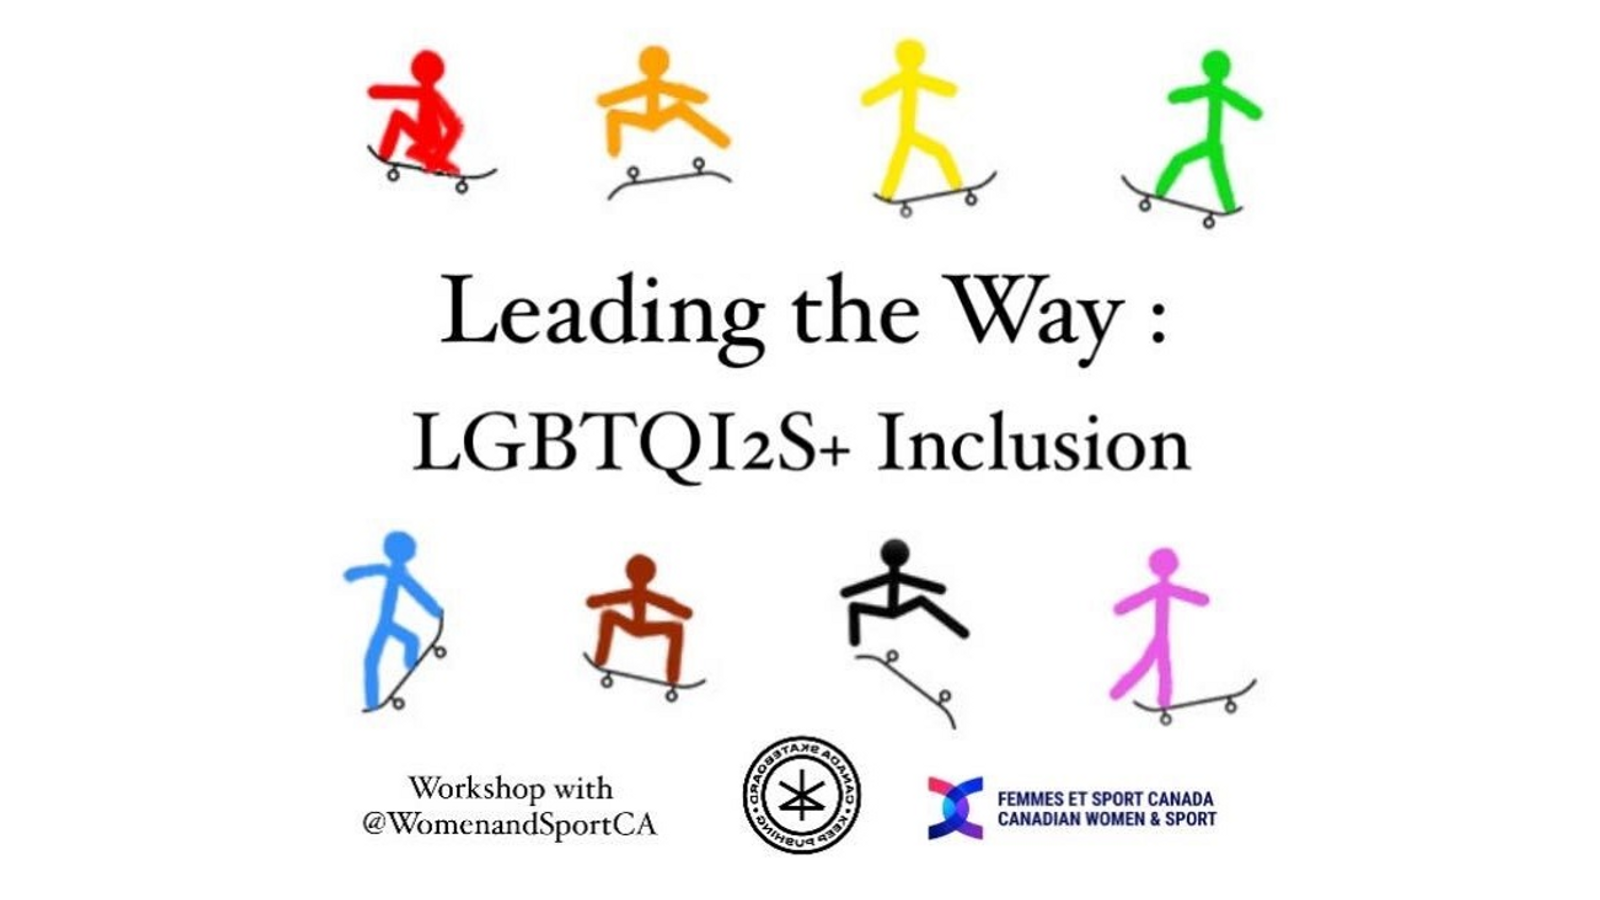 Leading the way: LGBTQI2S+ Inclusion